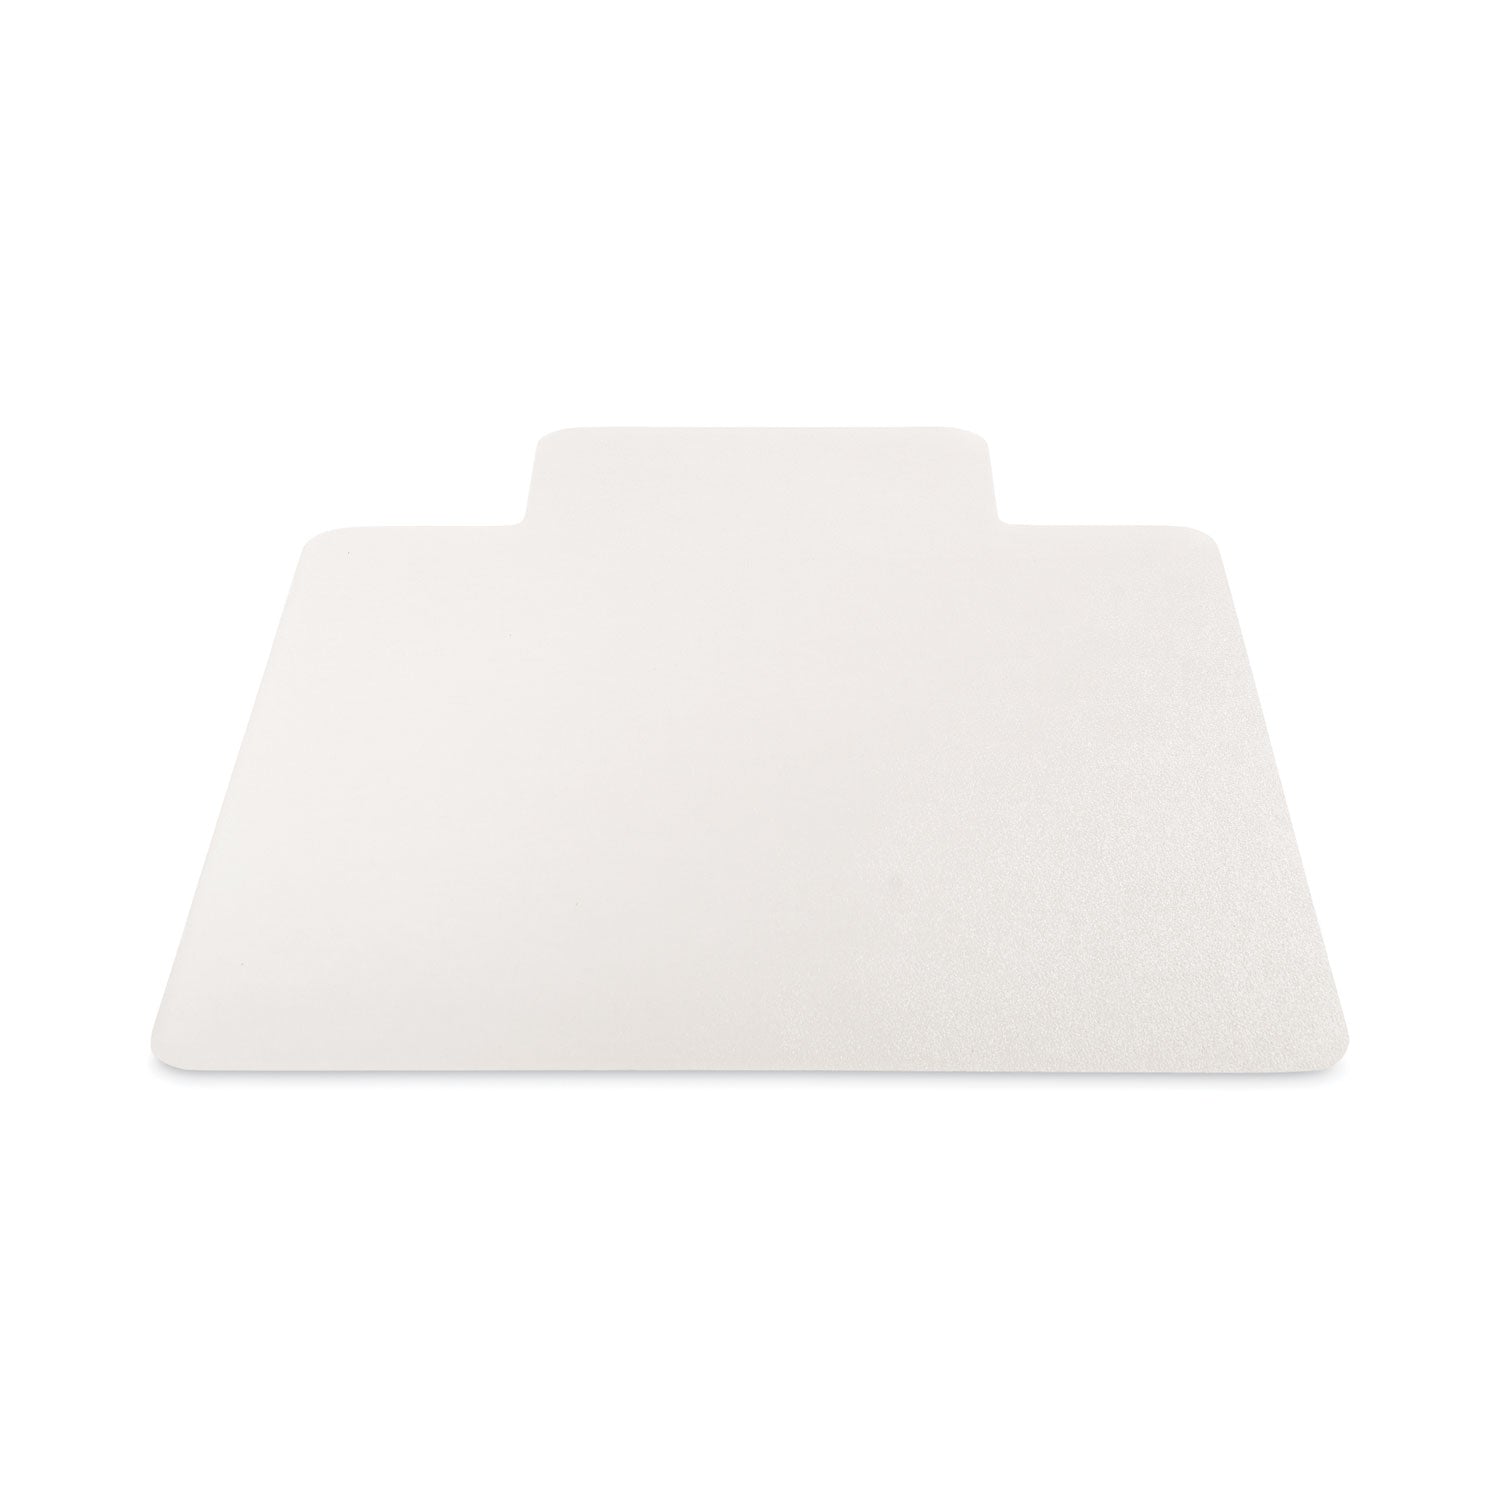 economat-all-day-use-chair-mat-for-hard-floors-flat-packed-46-x-60-lipped-clear_defcm2e432f - 7